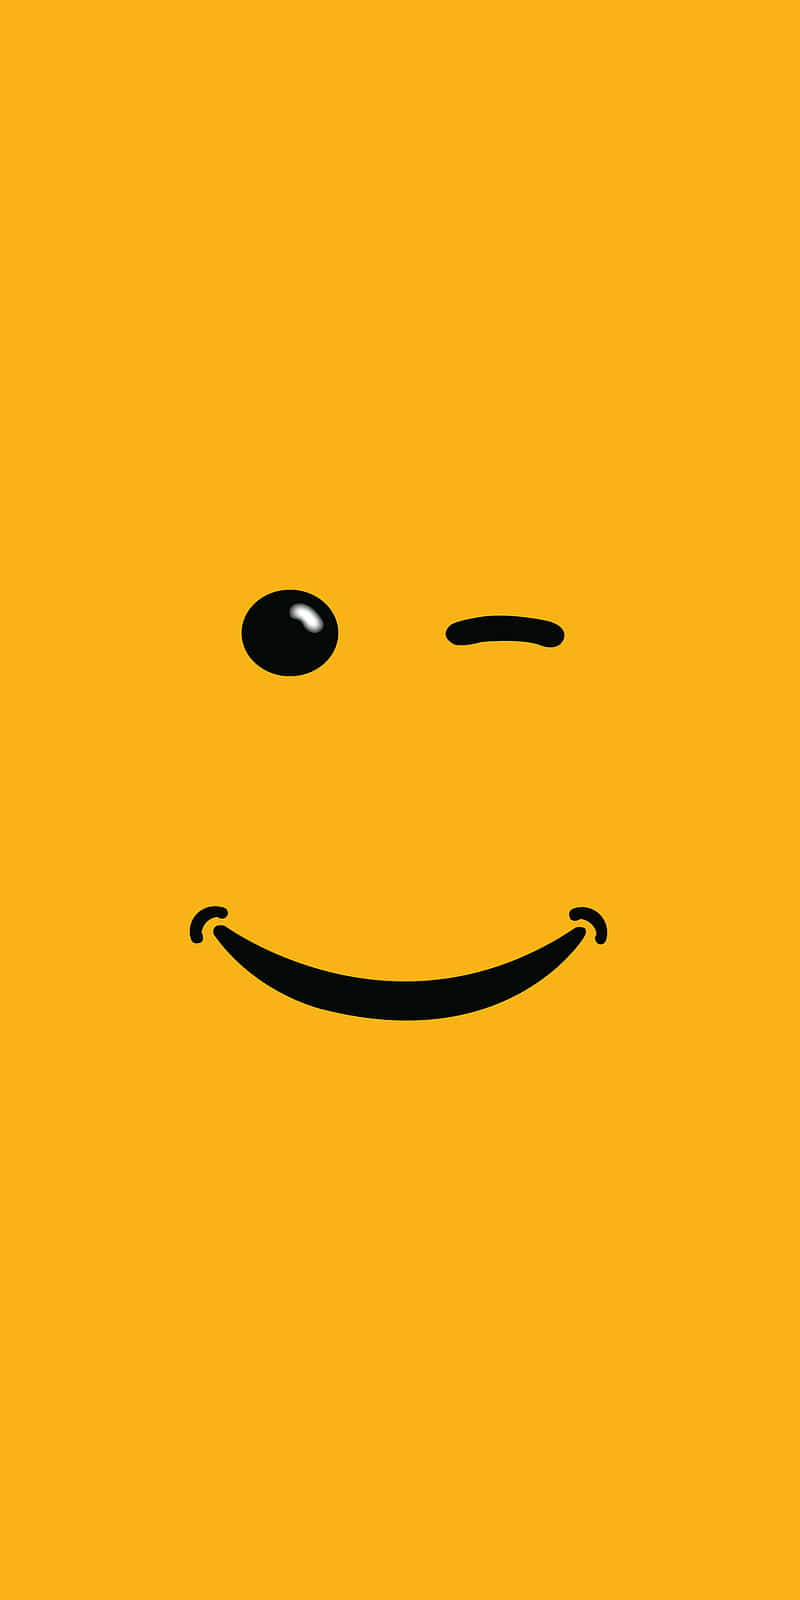 A Yellow Smiley Face With Black Eyes Background